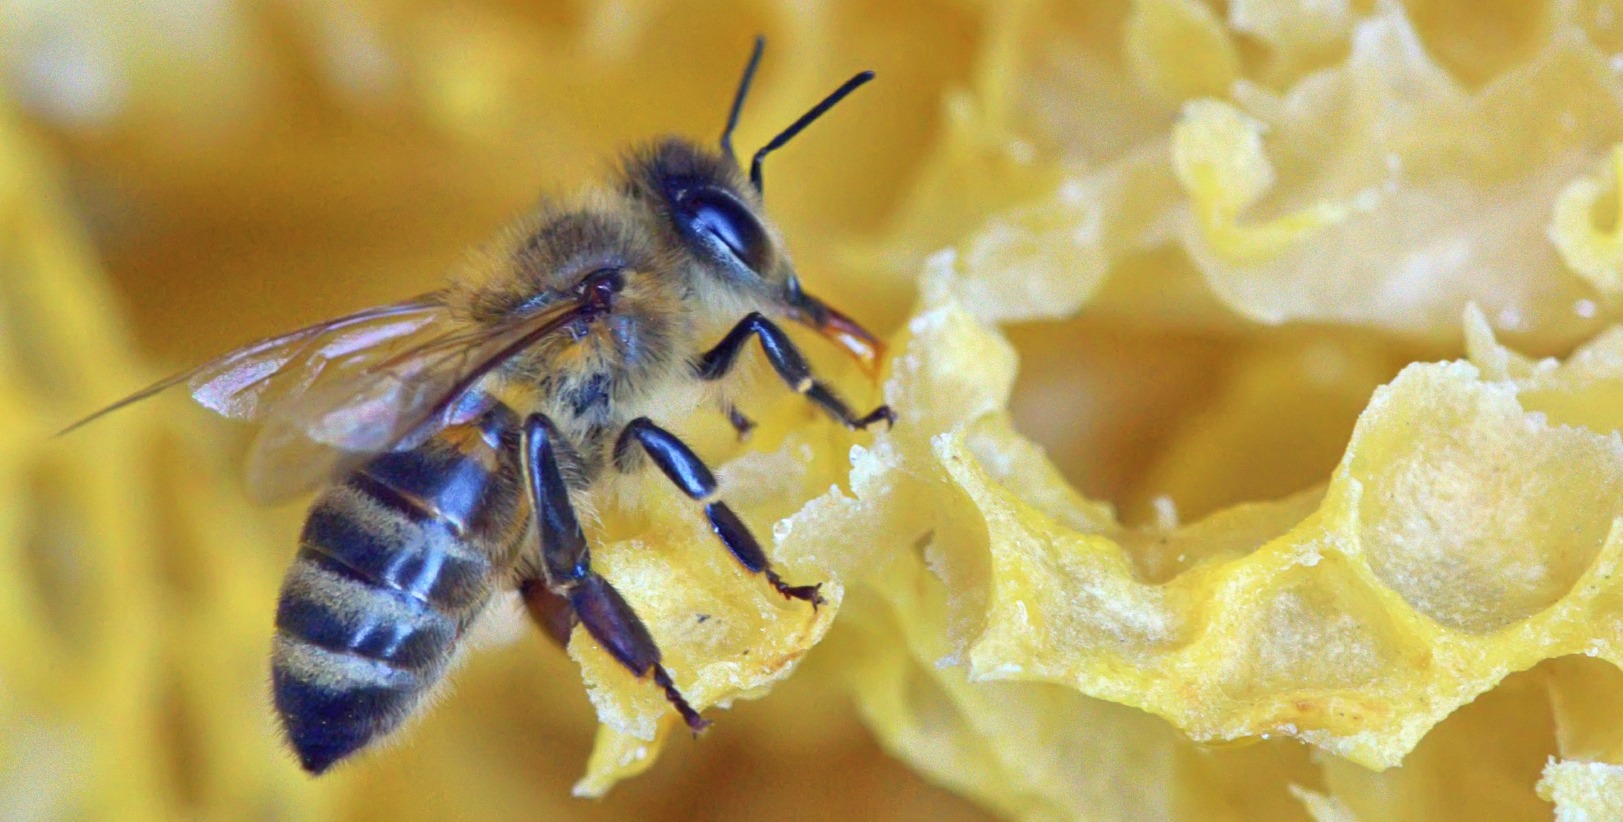 Weekly roundup and colony collapse disorder